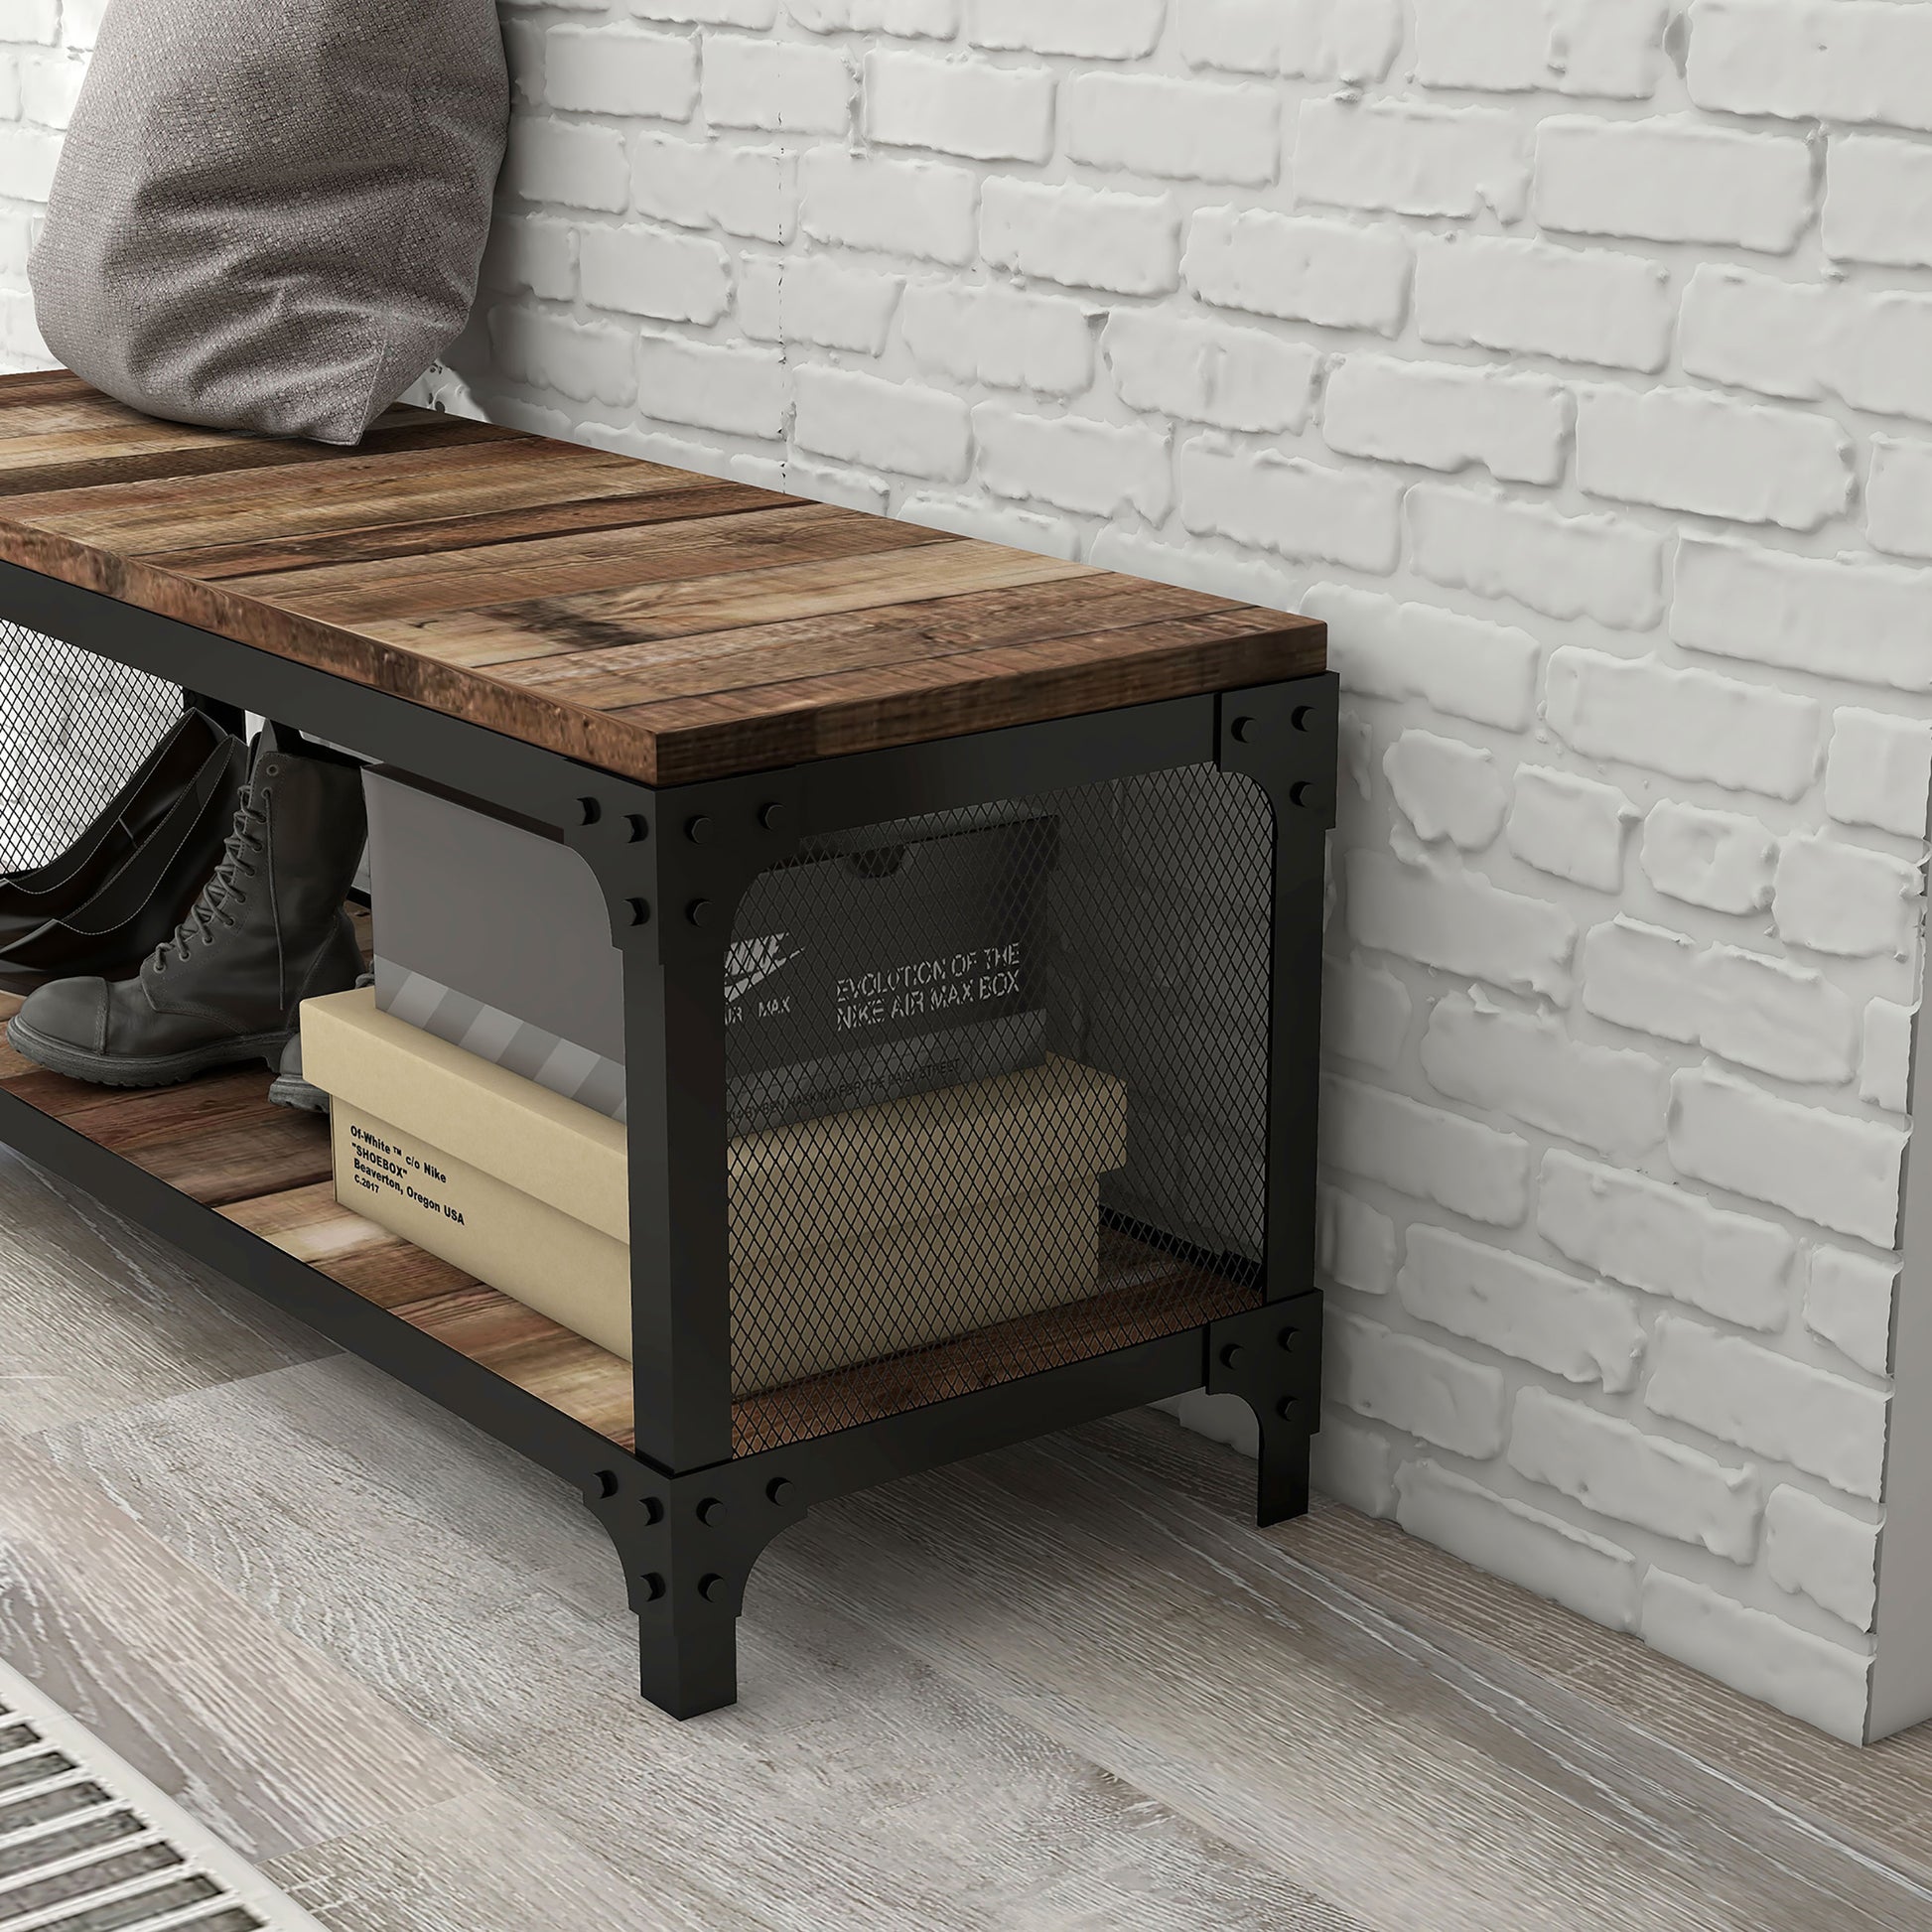 Left angled close-up mesh side detail view of an industrial reclaimed barnwood shoe storage bench with a shelf in a ;living area with accessories